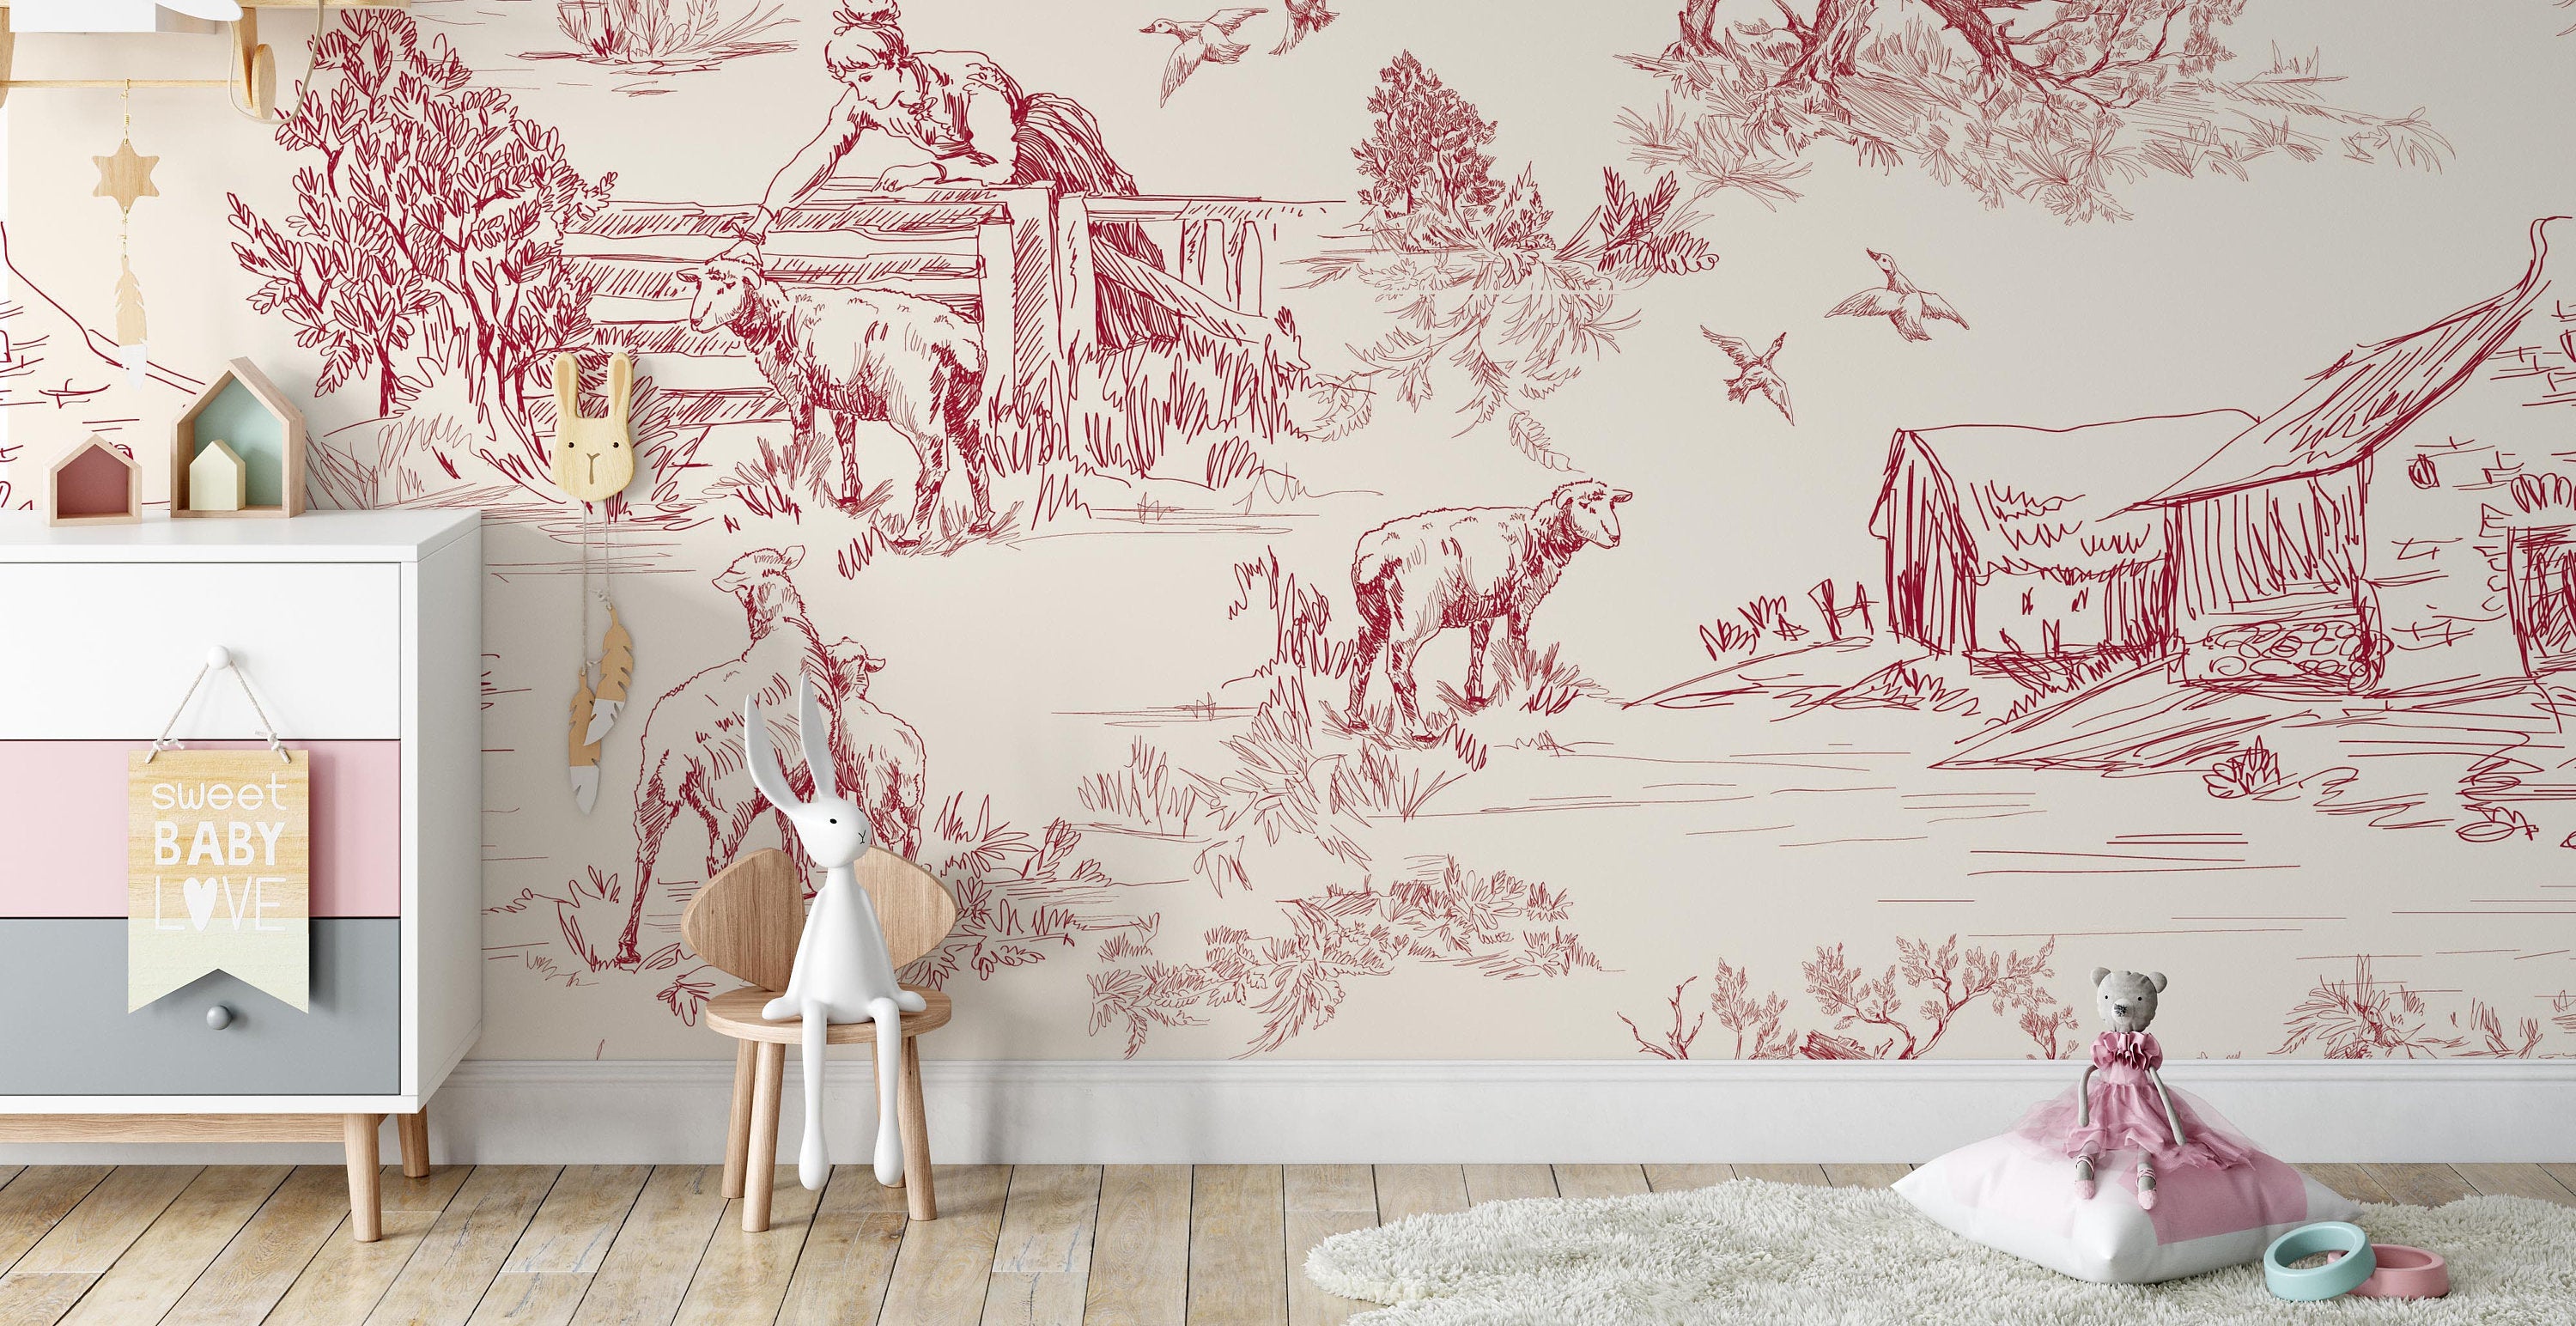 Pattern Scenes of Countryside Life with House Sheeps People Trees in Red Wallpaper Self Adhesive Peel and Stick Wall Decoration Removable